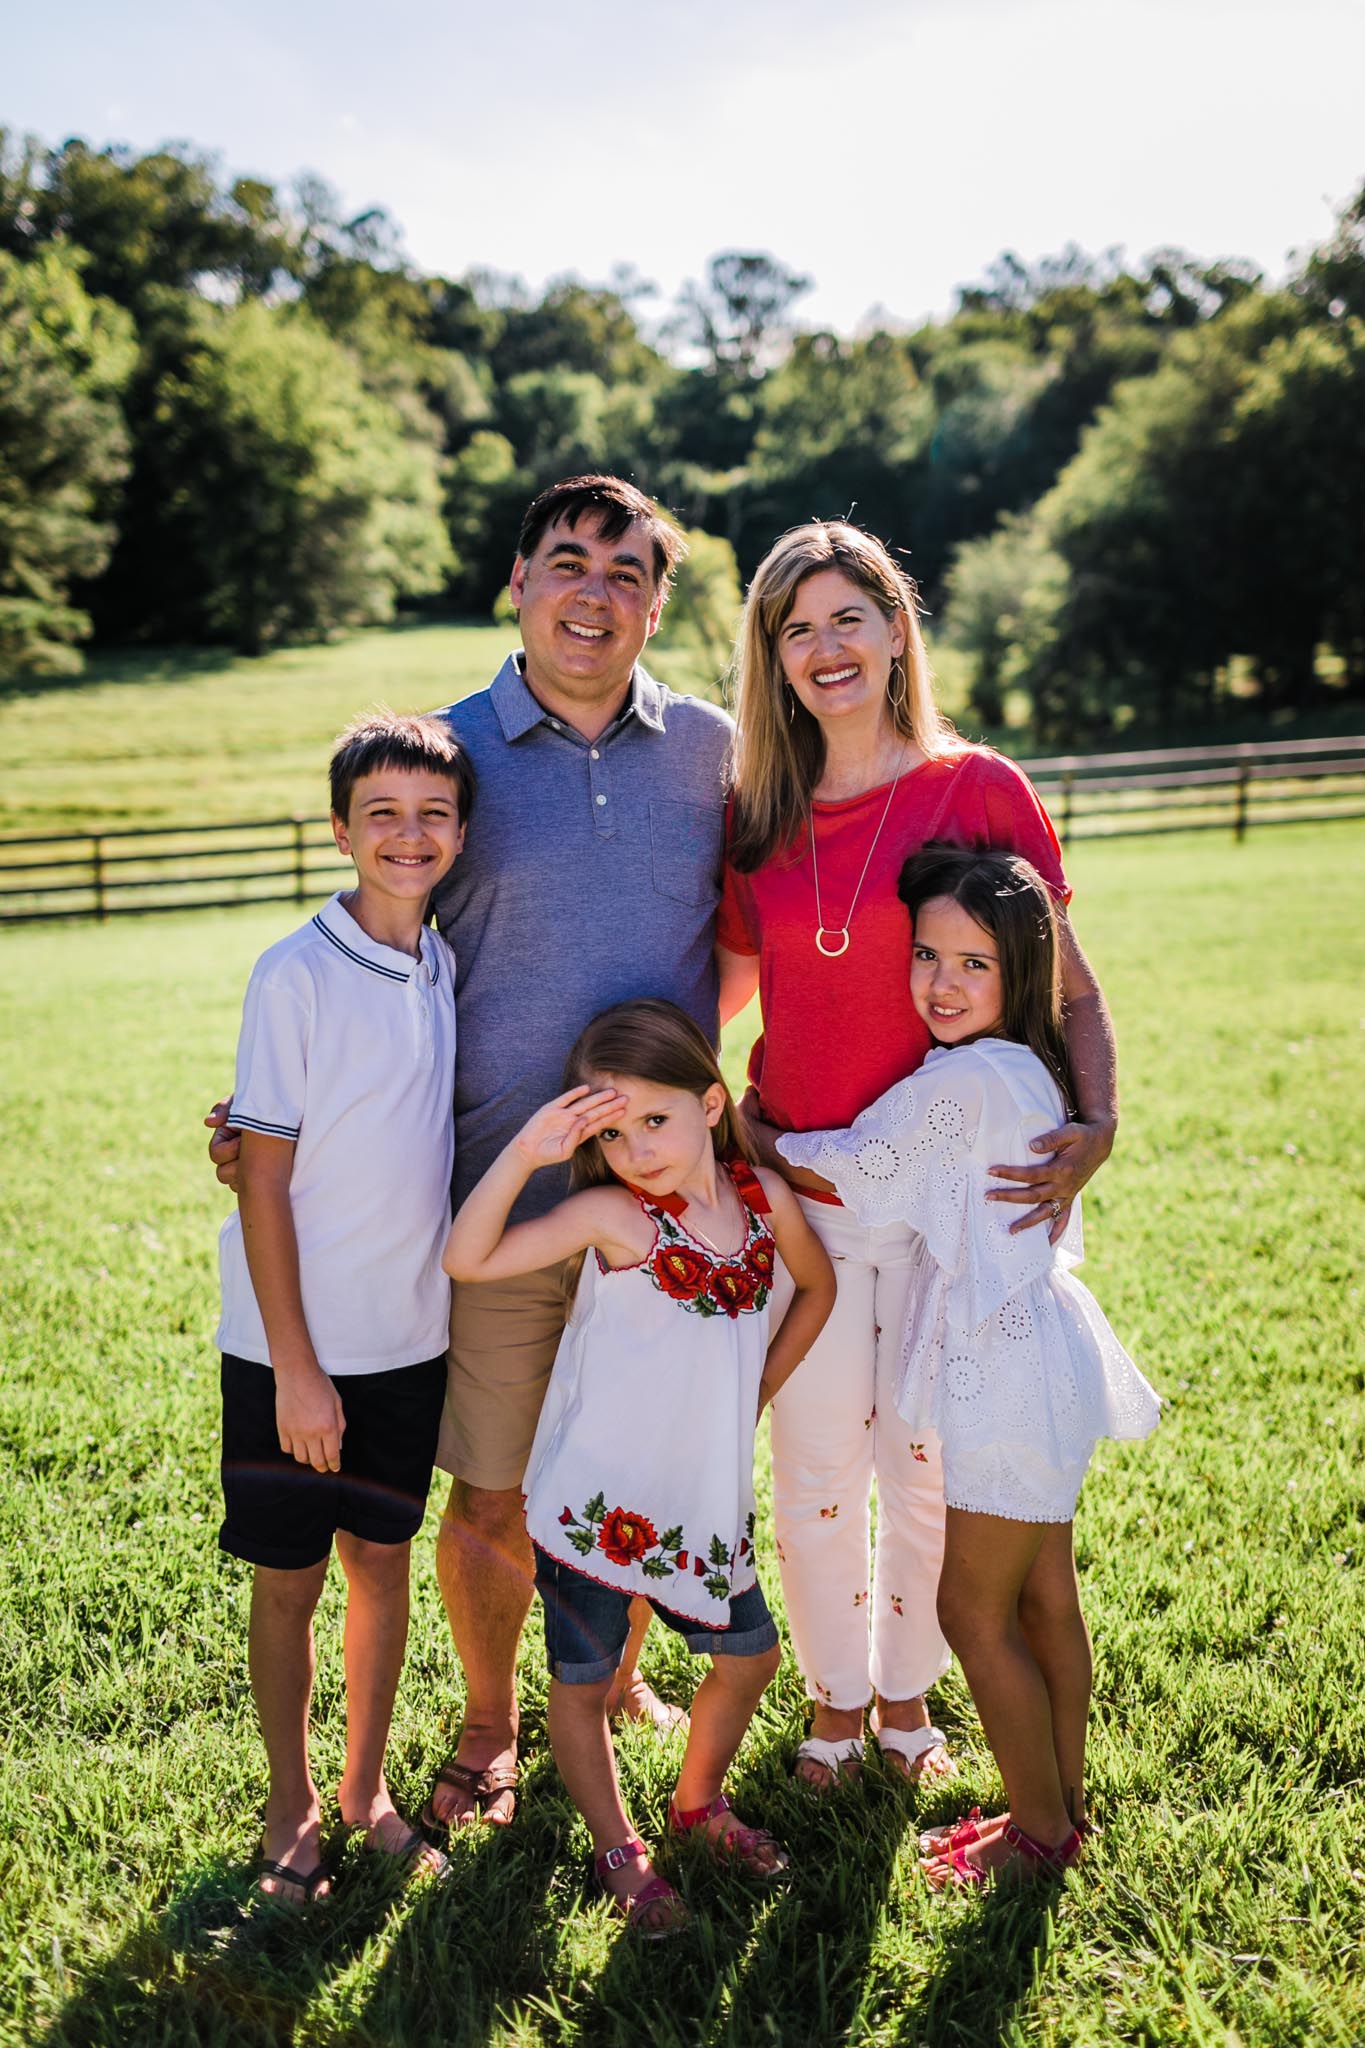 Durham Family Photographer | By G. Lin Photography | Summer family photo outside